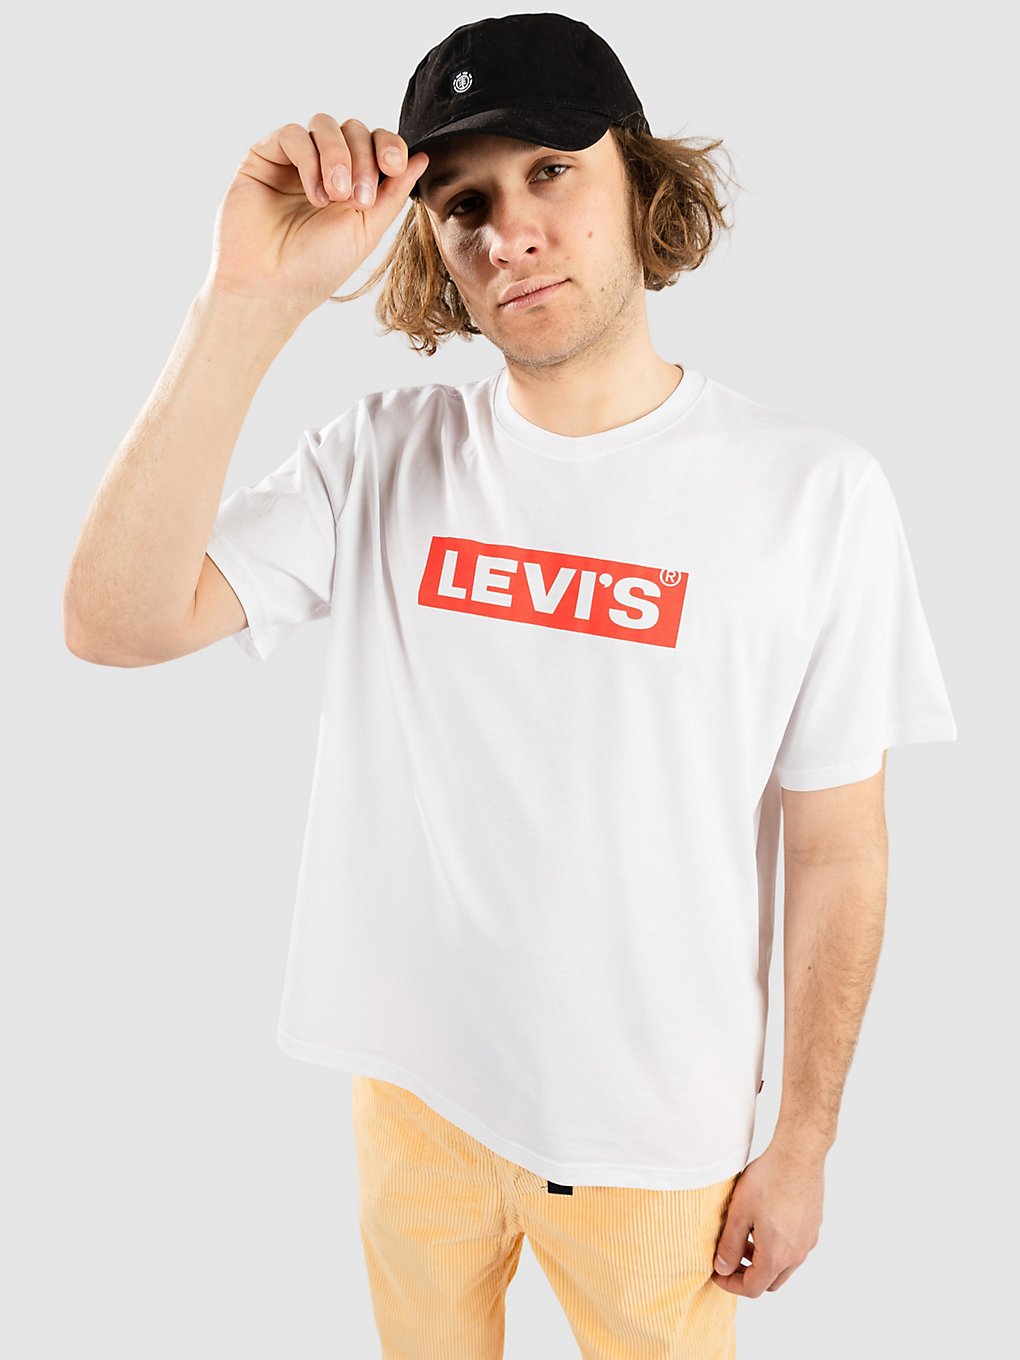 Levi's Relaxed Fit Reds T-Shirt boxtab+ white+ kaufen